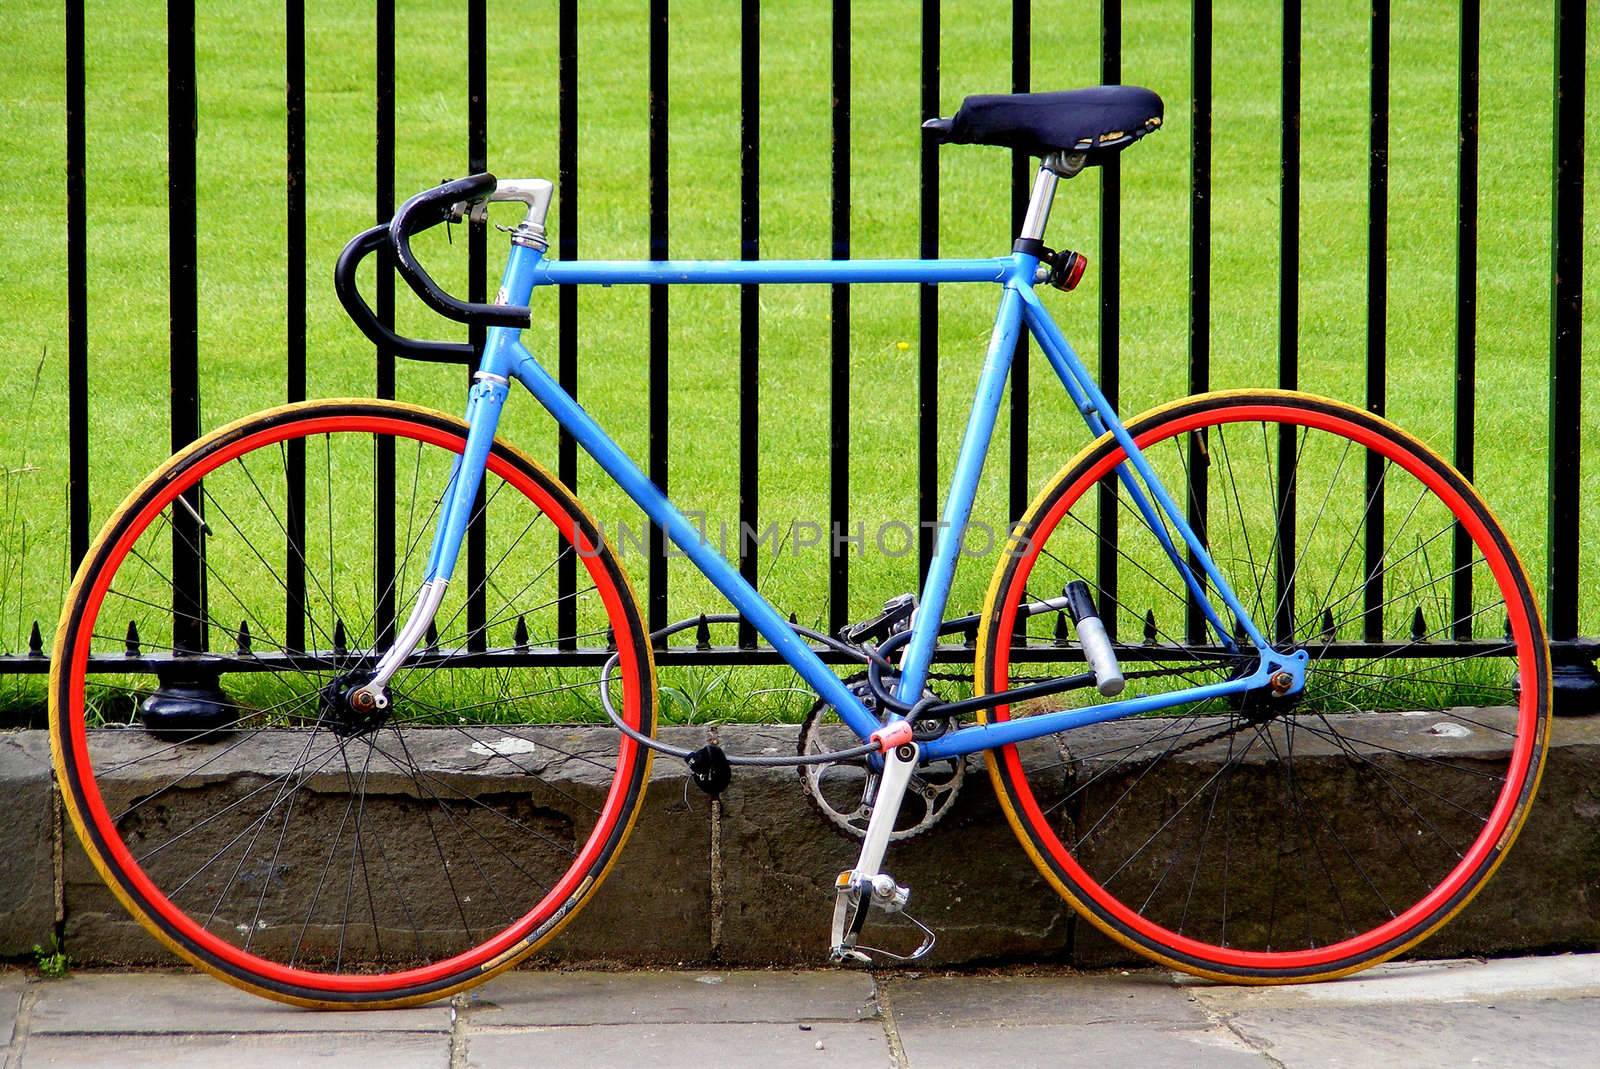 Bicycle from Oxford